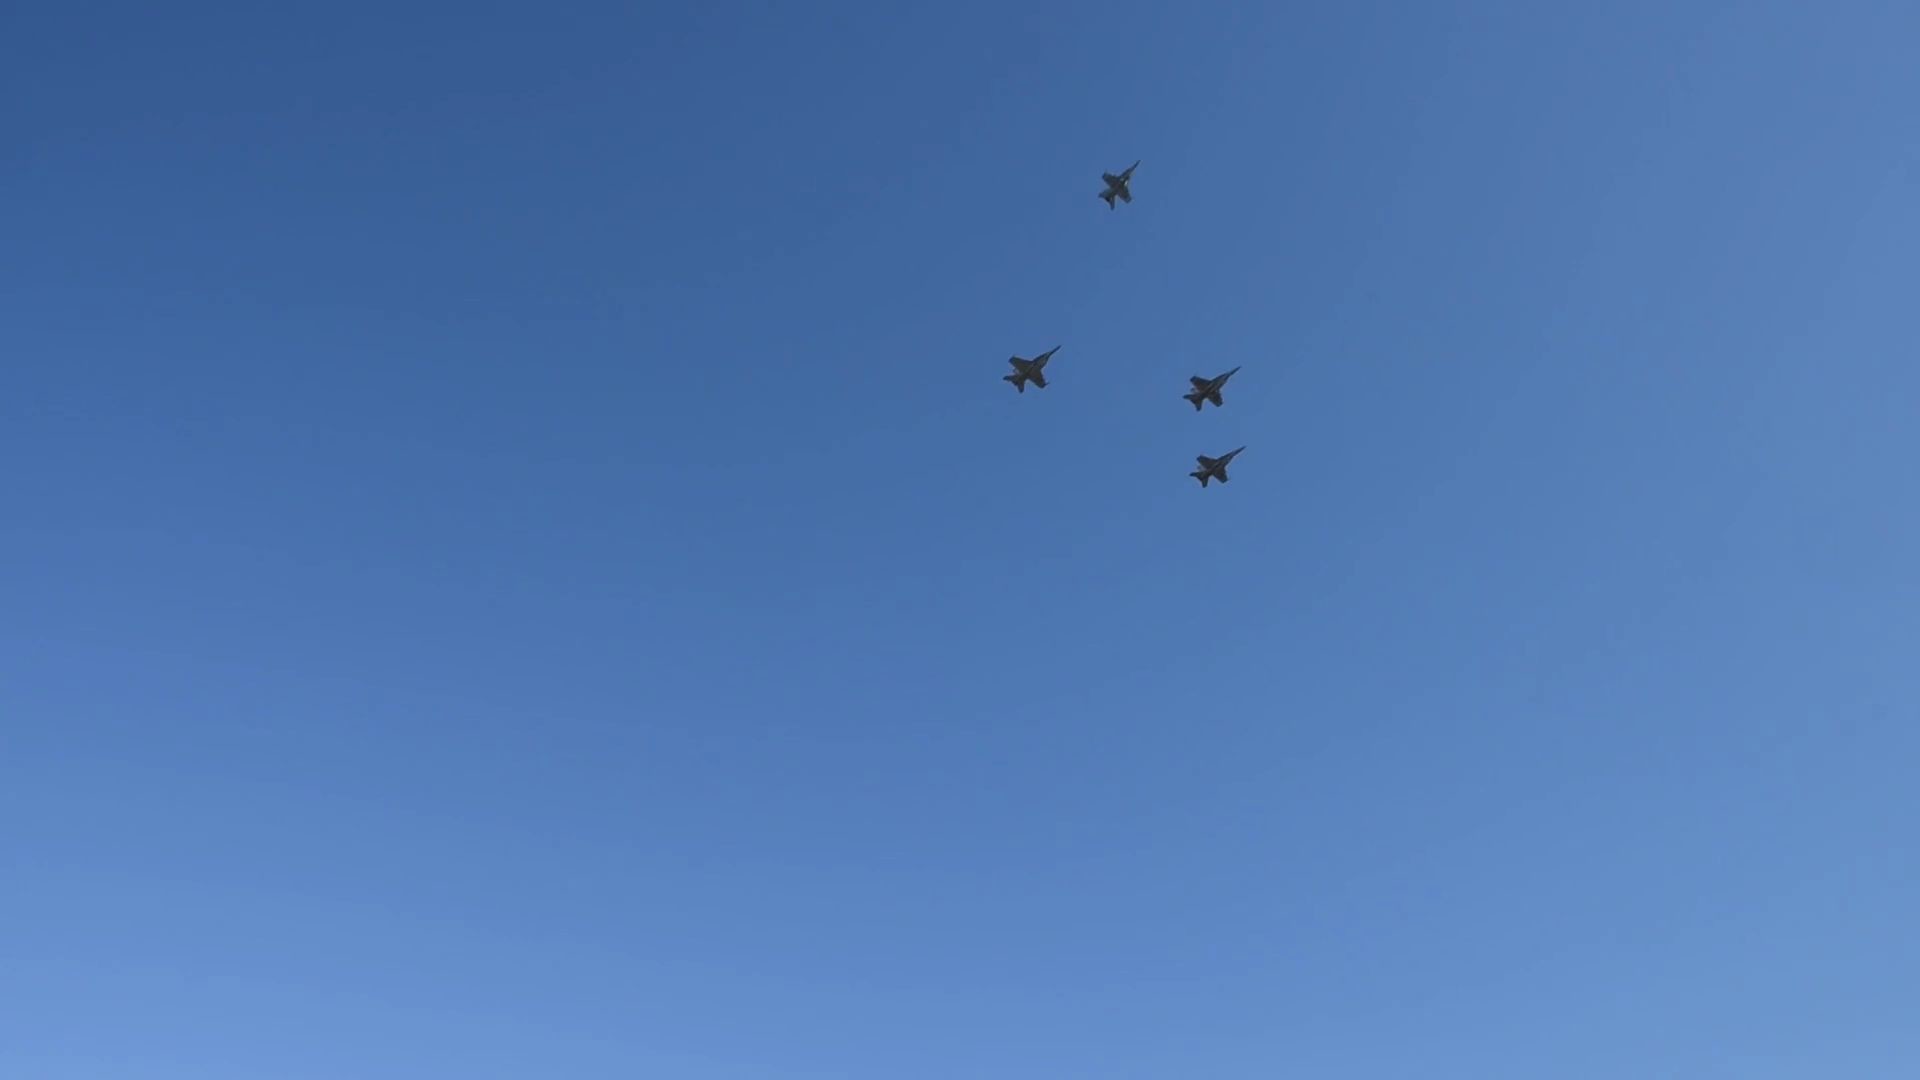 Watch the missing man formation flyover for Capt. Rosemary Mariner